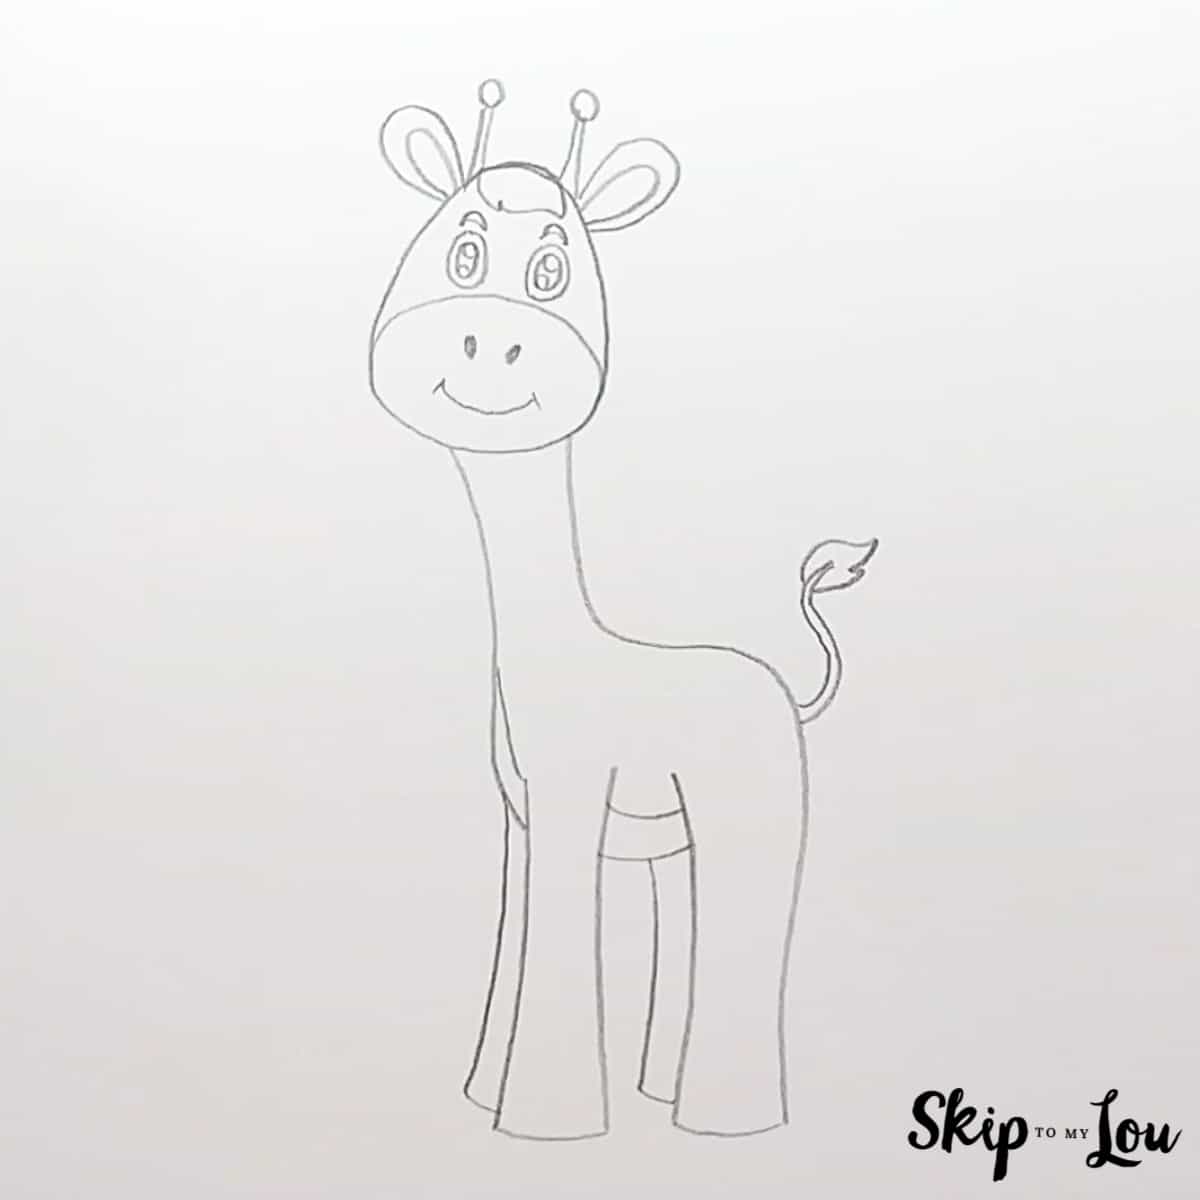 Cartoon Giraffe Drawing Guide - Step 4 - The rest of the body